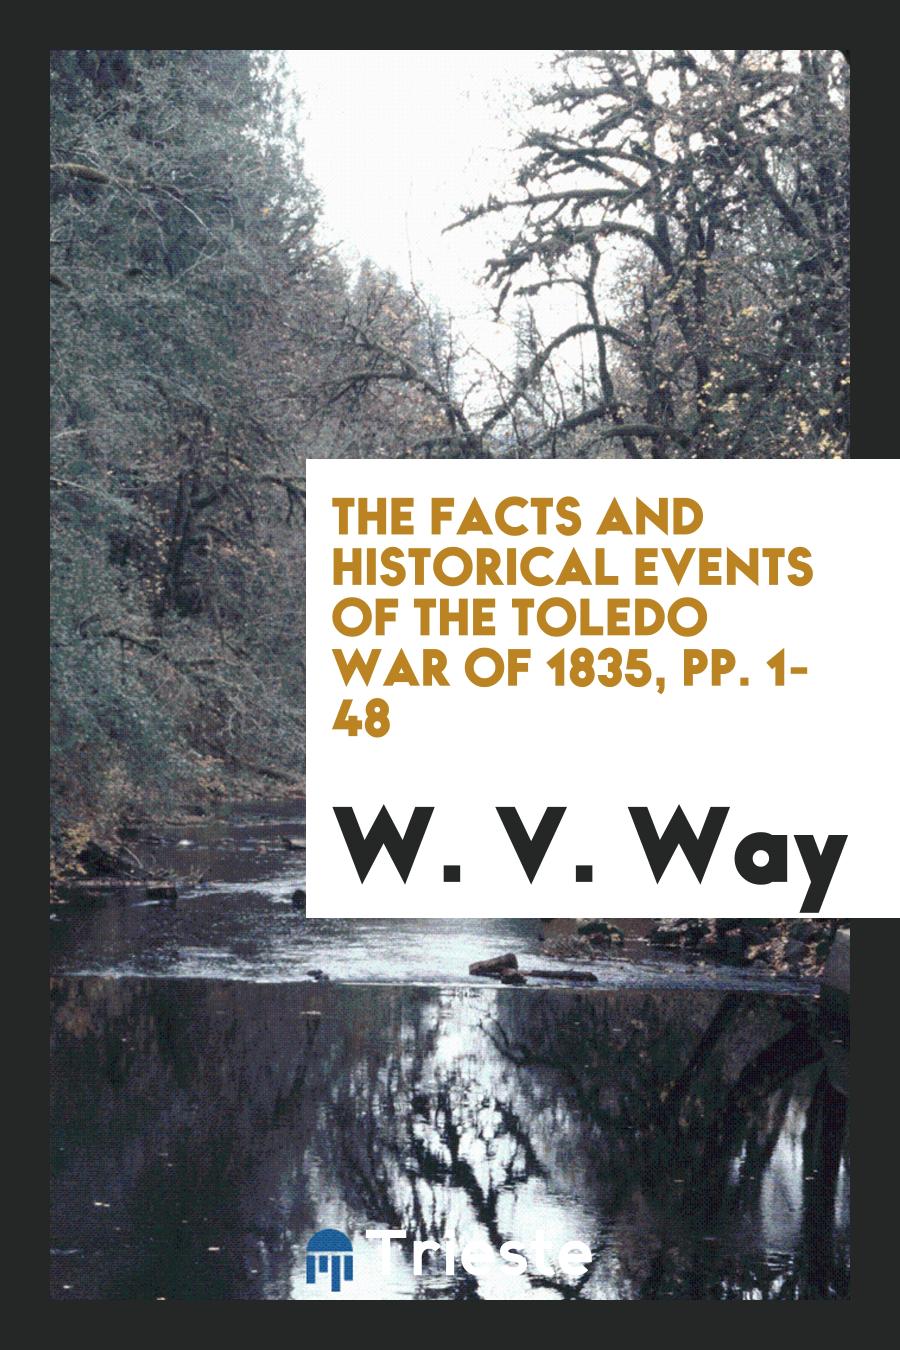 The Facts and Historical Events of the Toledo War of 1835, pp. 1-48